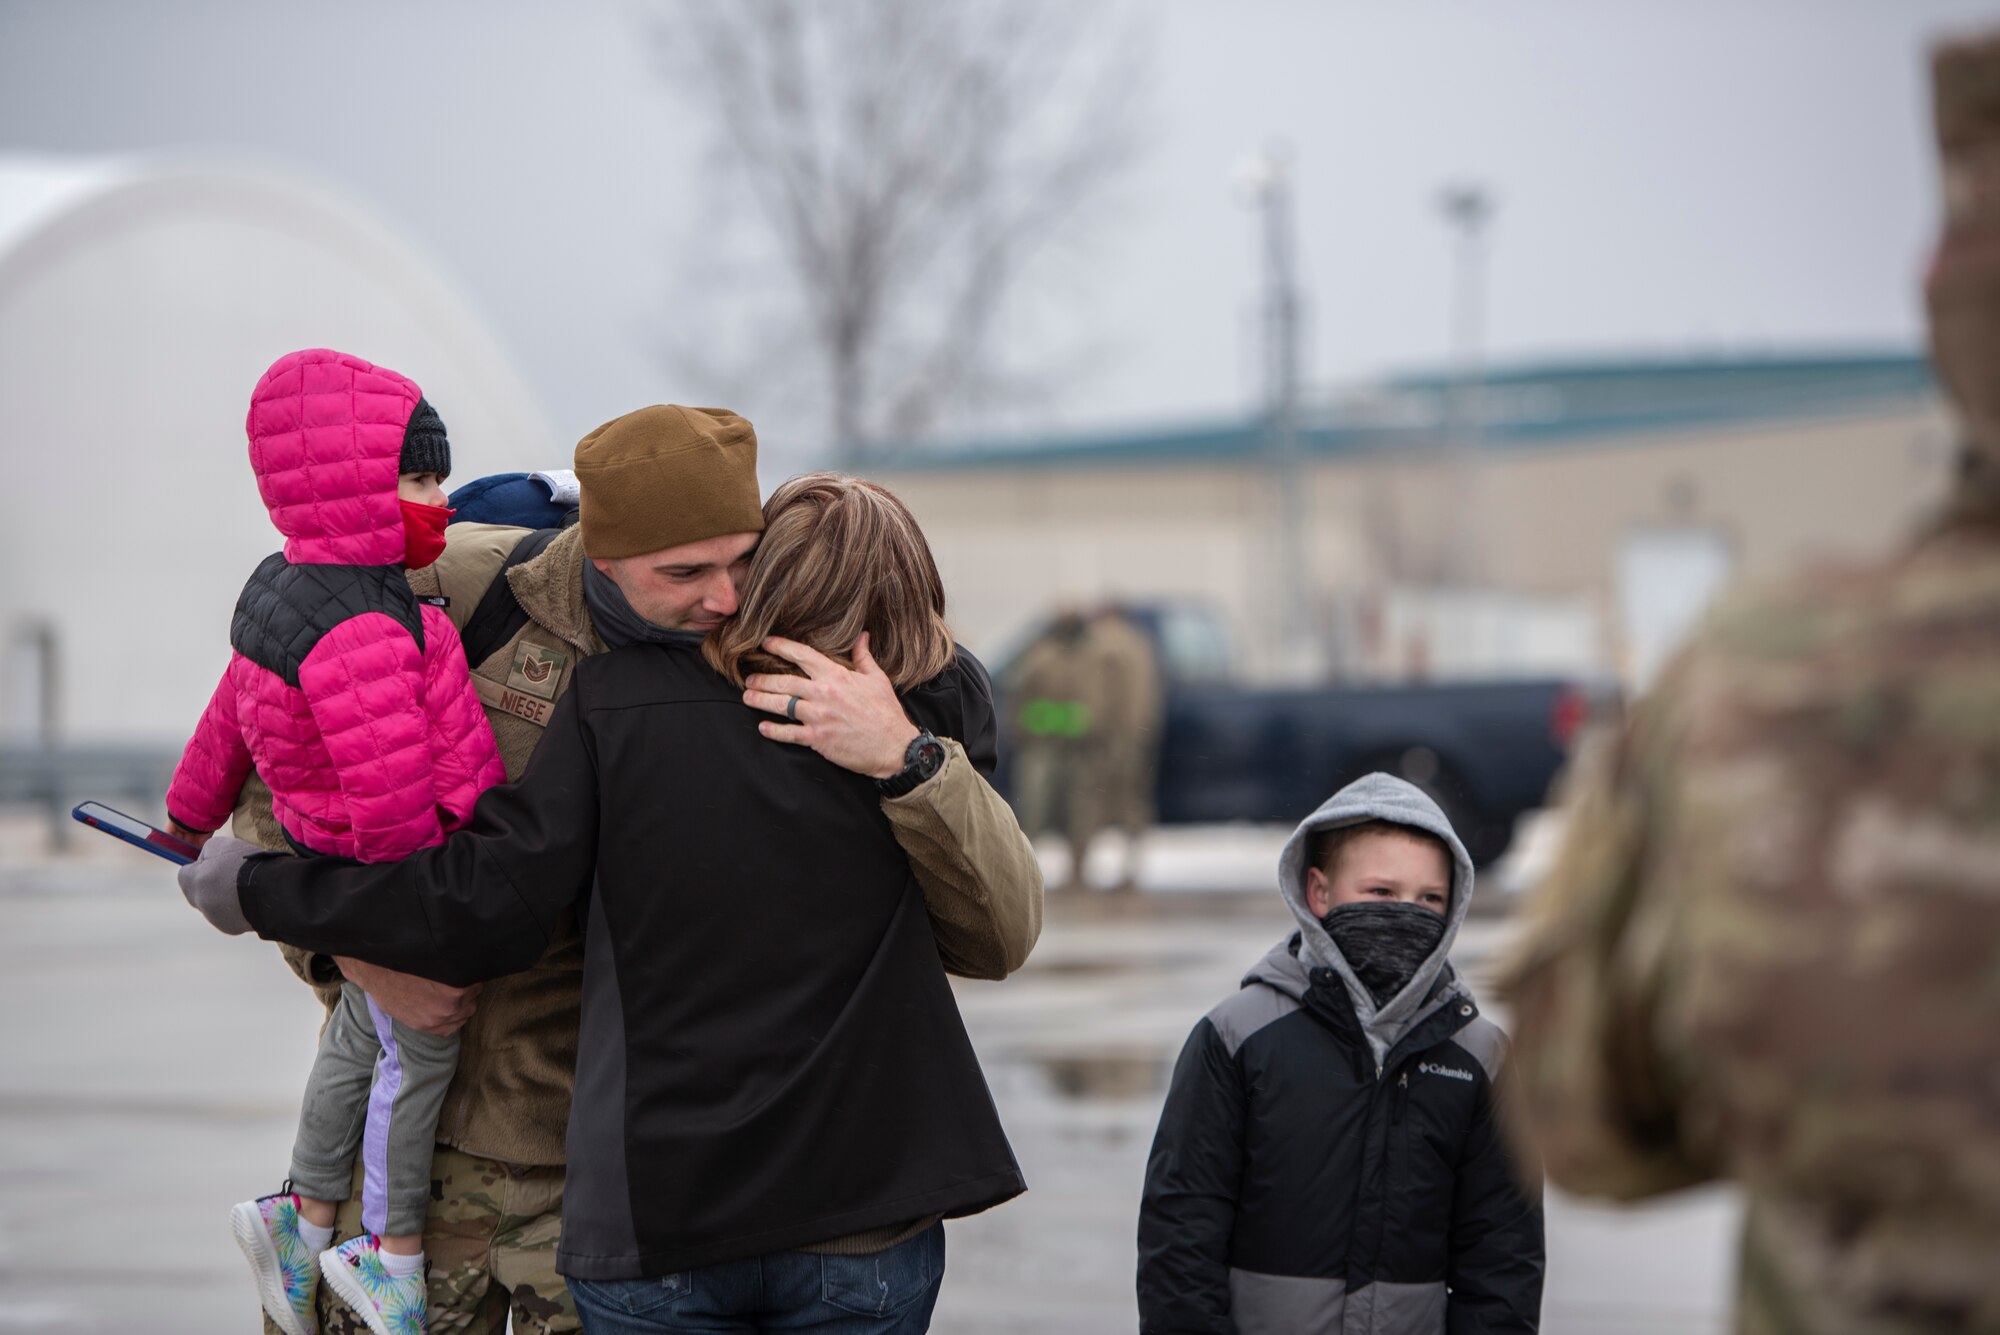 A U.S. Airman, assigned to the Ohio National Guard’s 180th Fighter Wing, embraces a loved one after returning home from an overseas deployment, Jan. 26, 2020 at the 180FW in Swanton, Ohio.